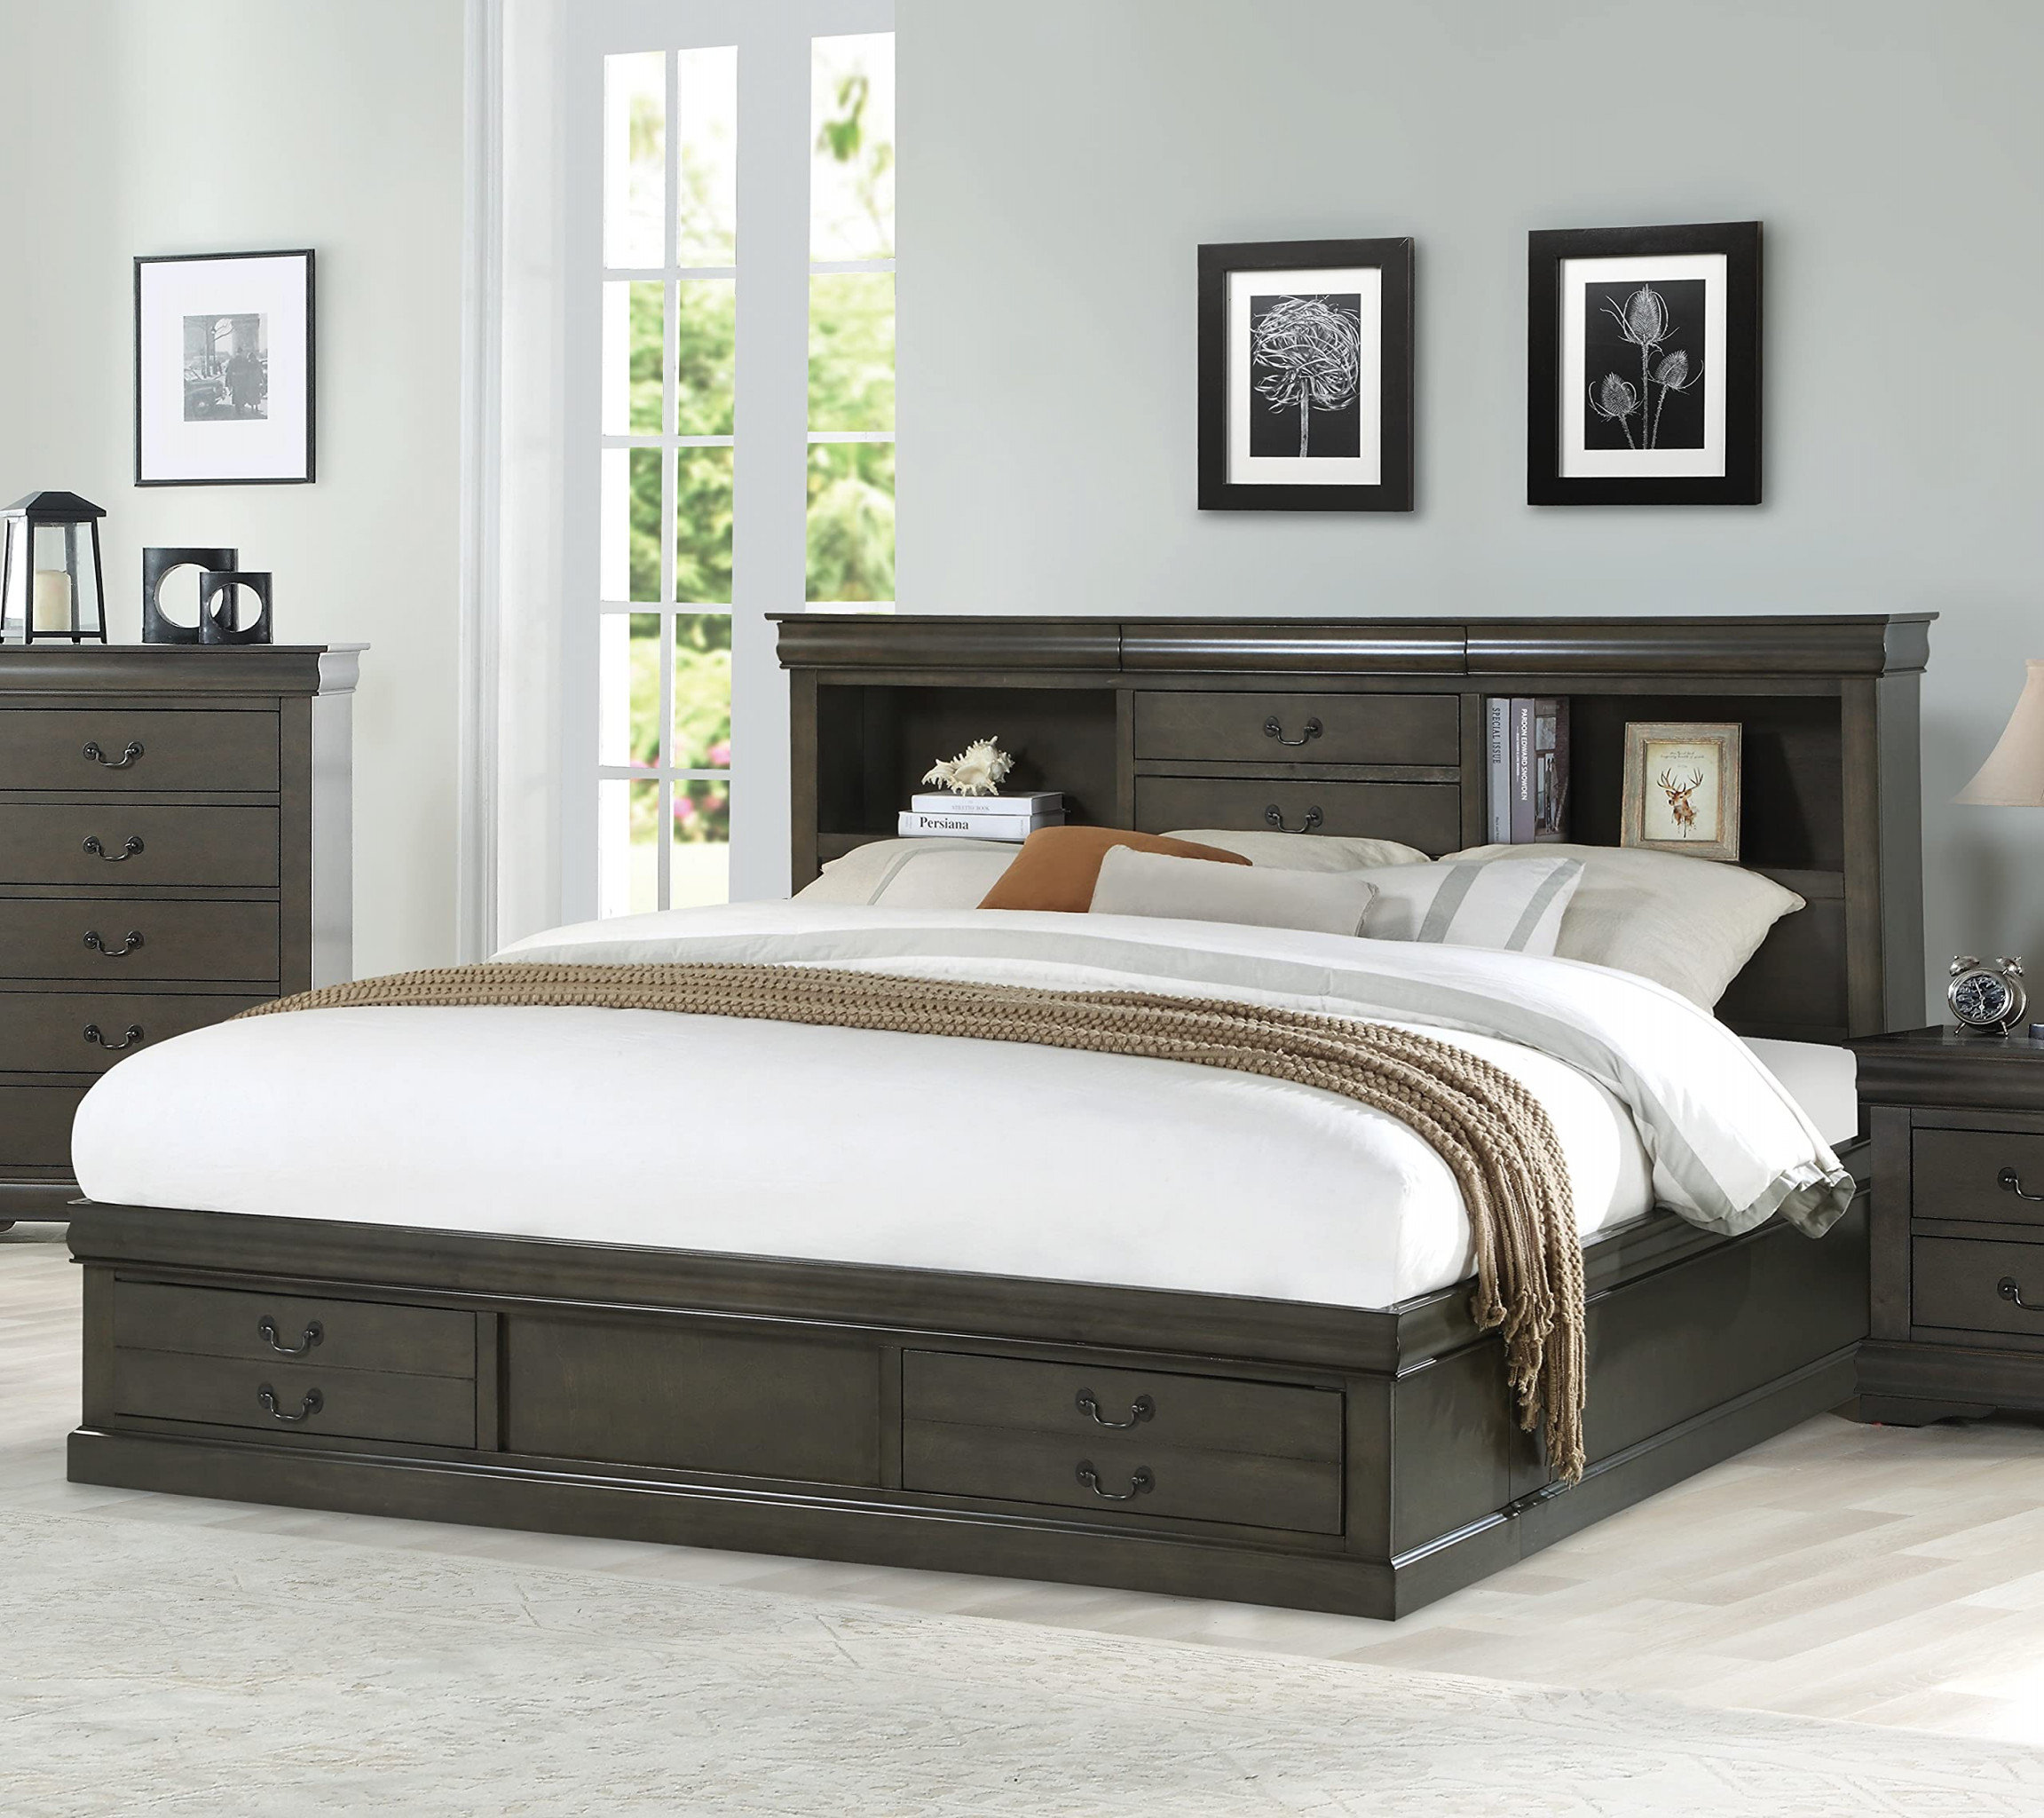 HABITRIO King Bed Frame, Solid Wood and Composite Construction King Size  Storage Bed with Headboard w/  Hidden Drawers& Bookshelves, Footboard w/